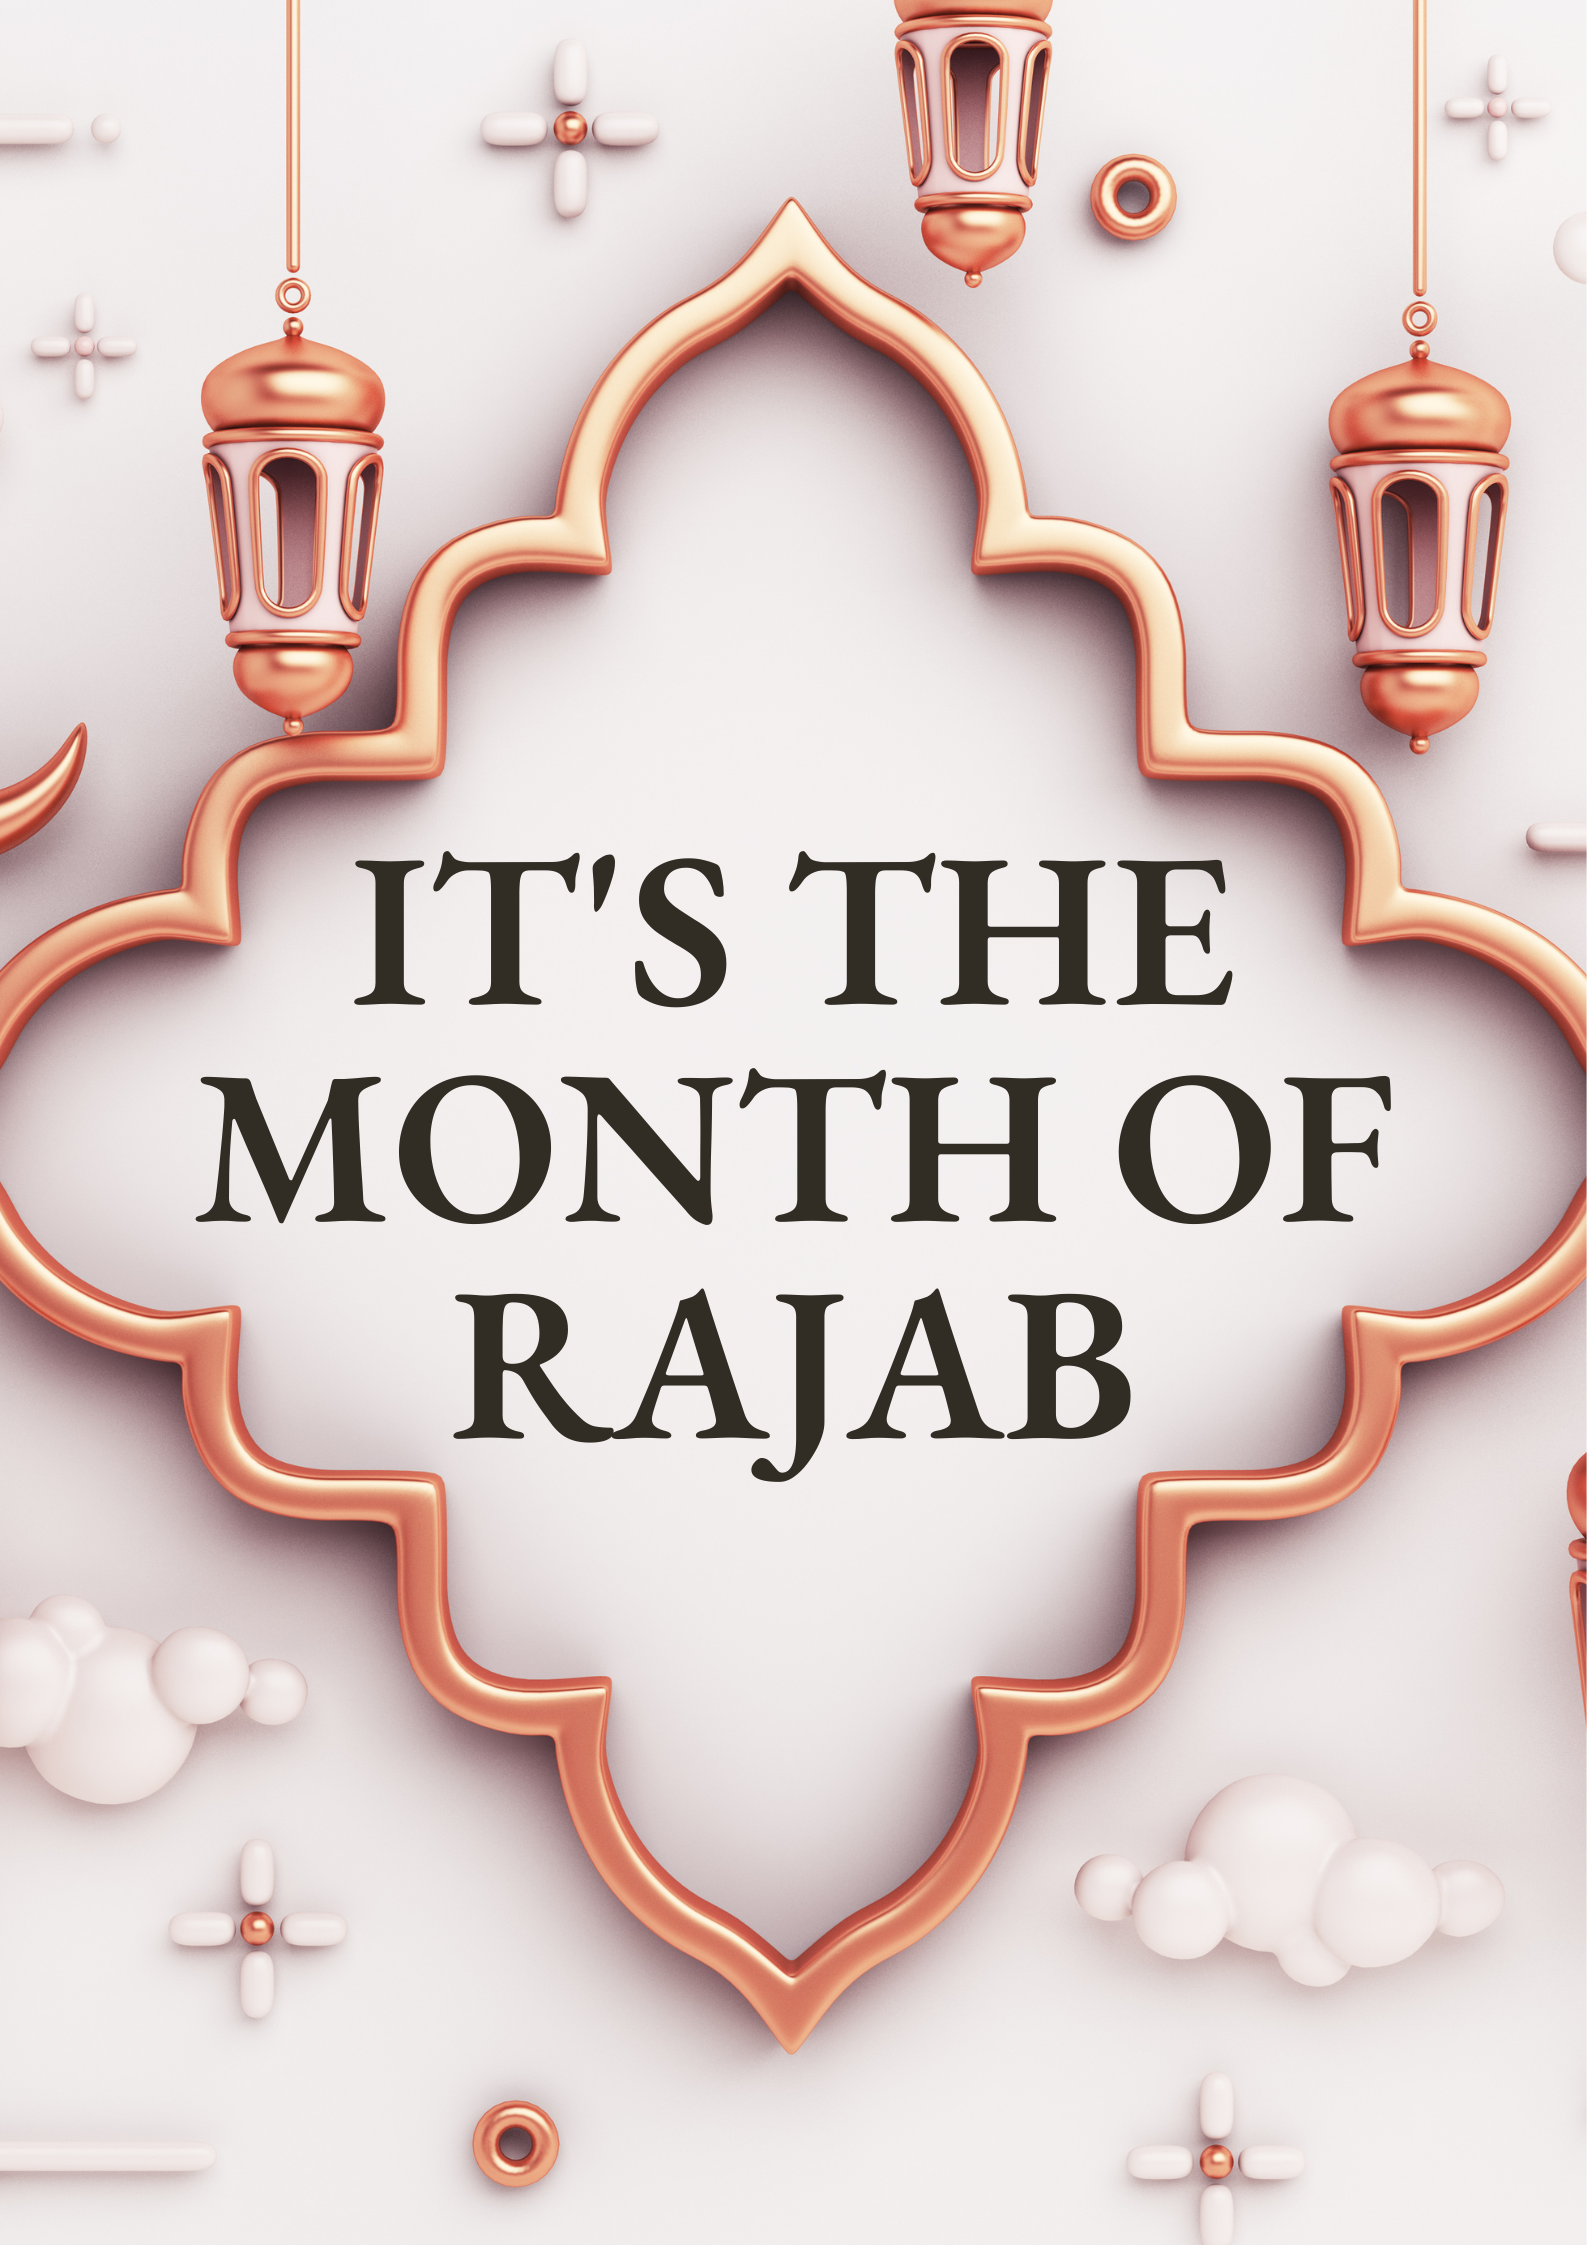 5 Things to do during the month of Rajab